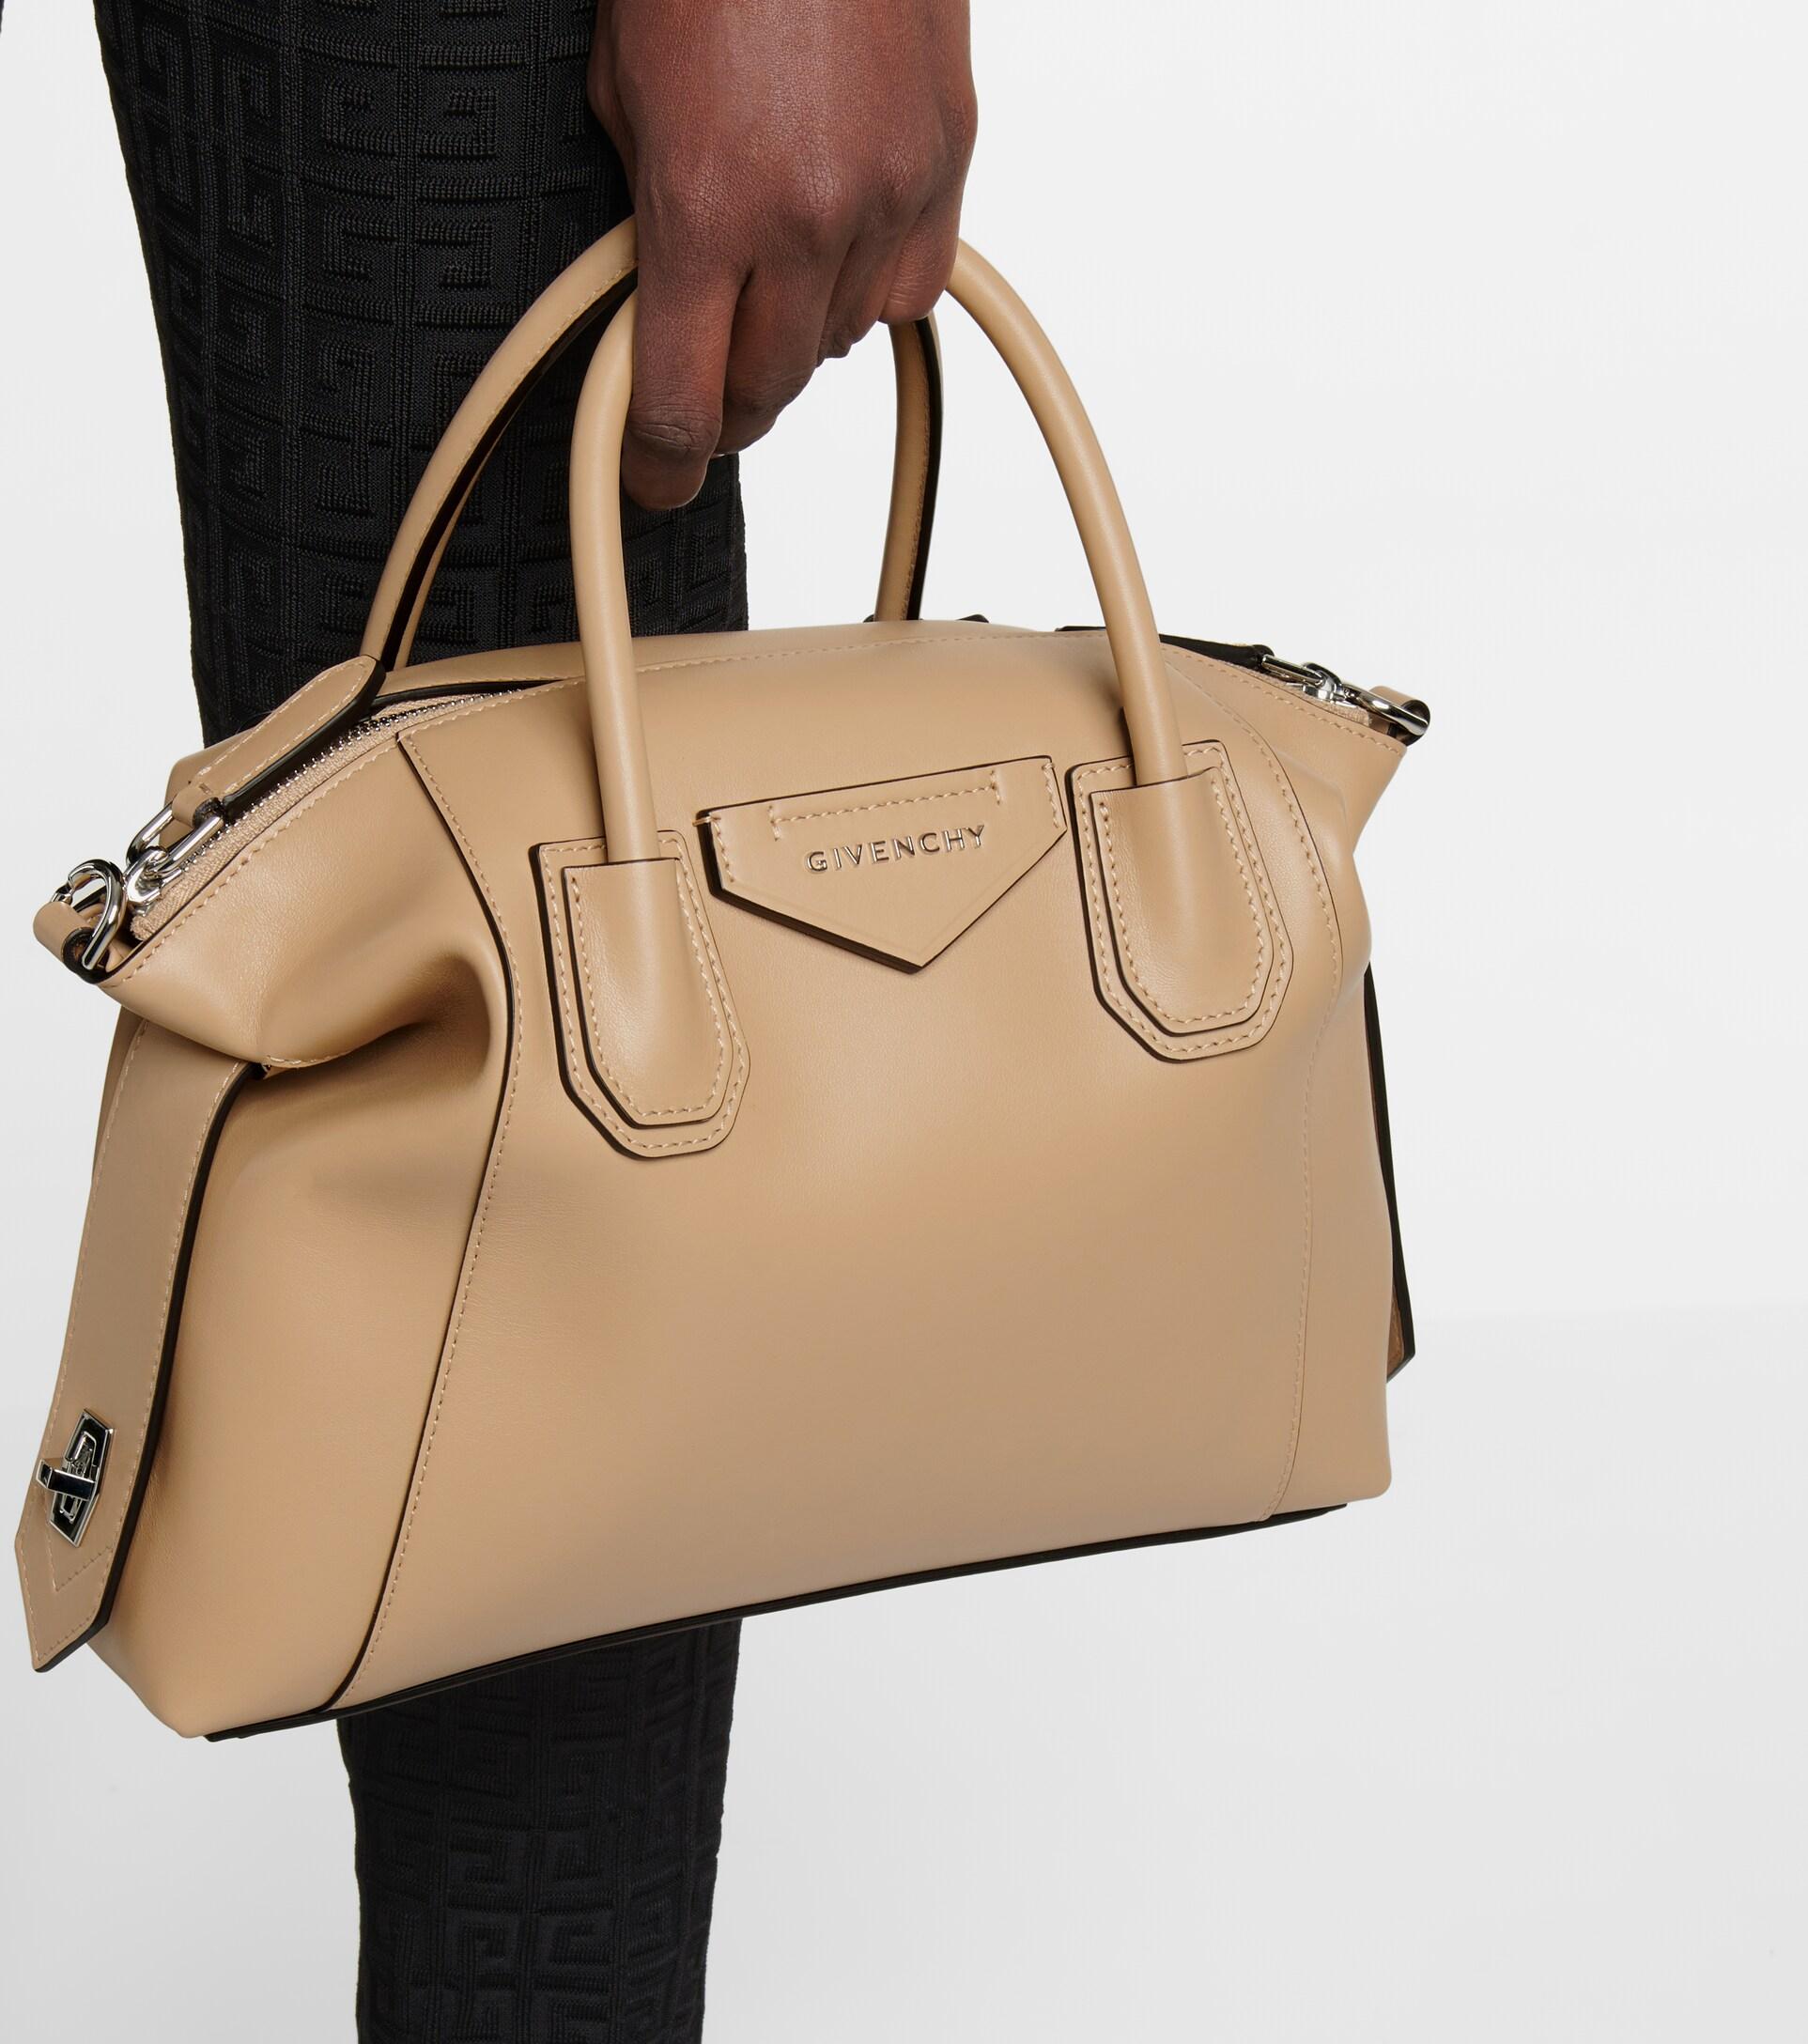 Givenchy Antigona Soft Small Leather Tote in Natural | Lyst